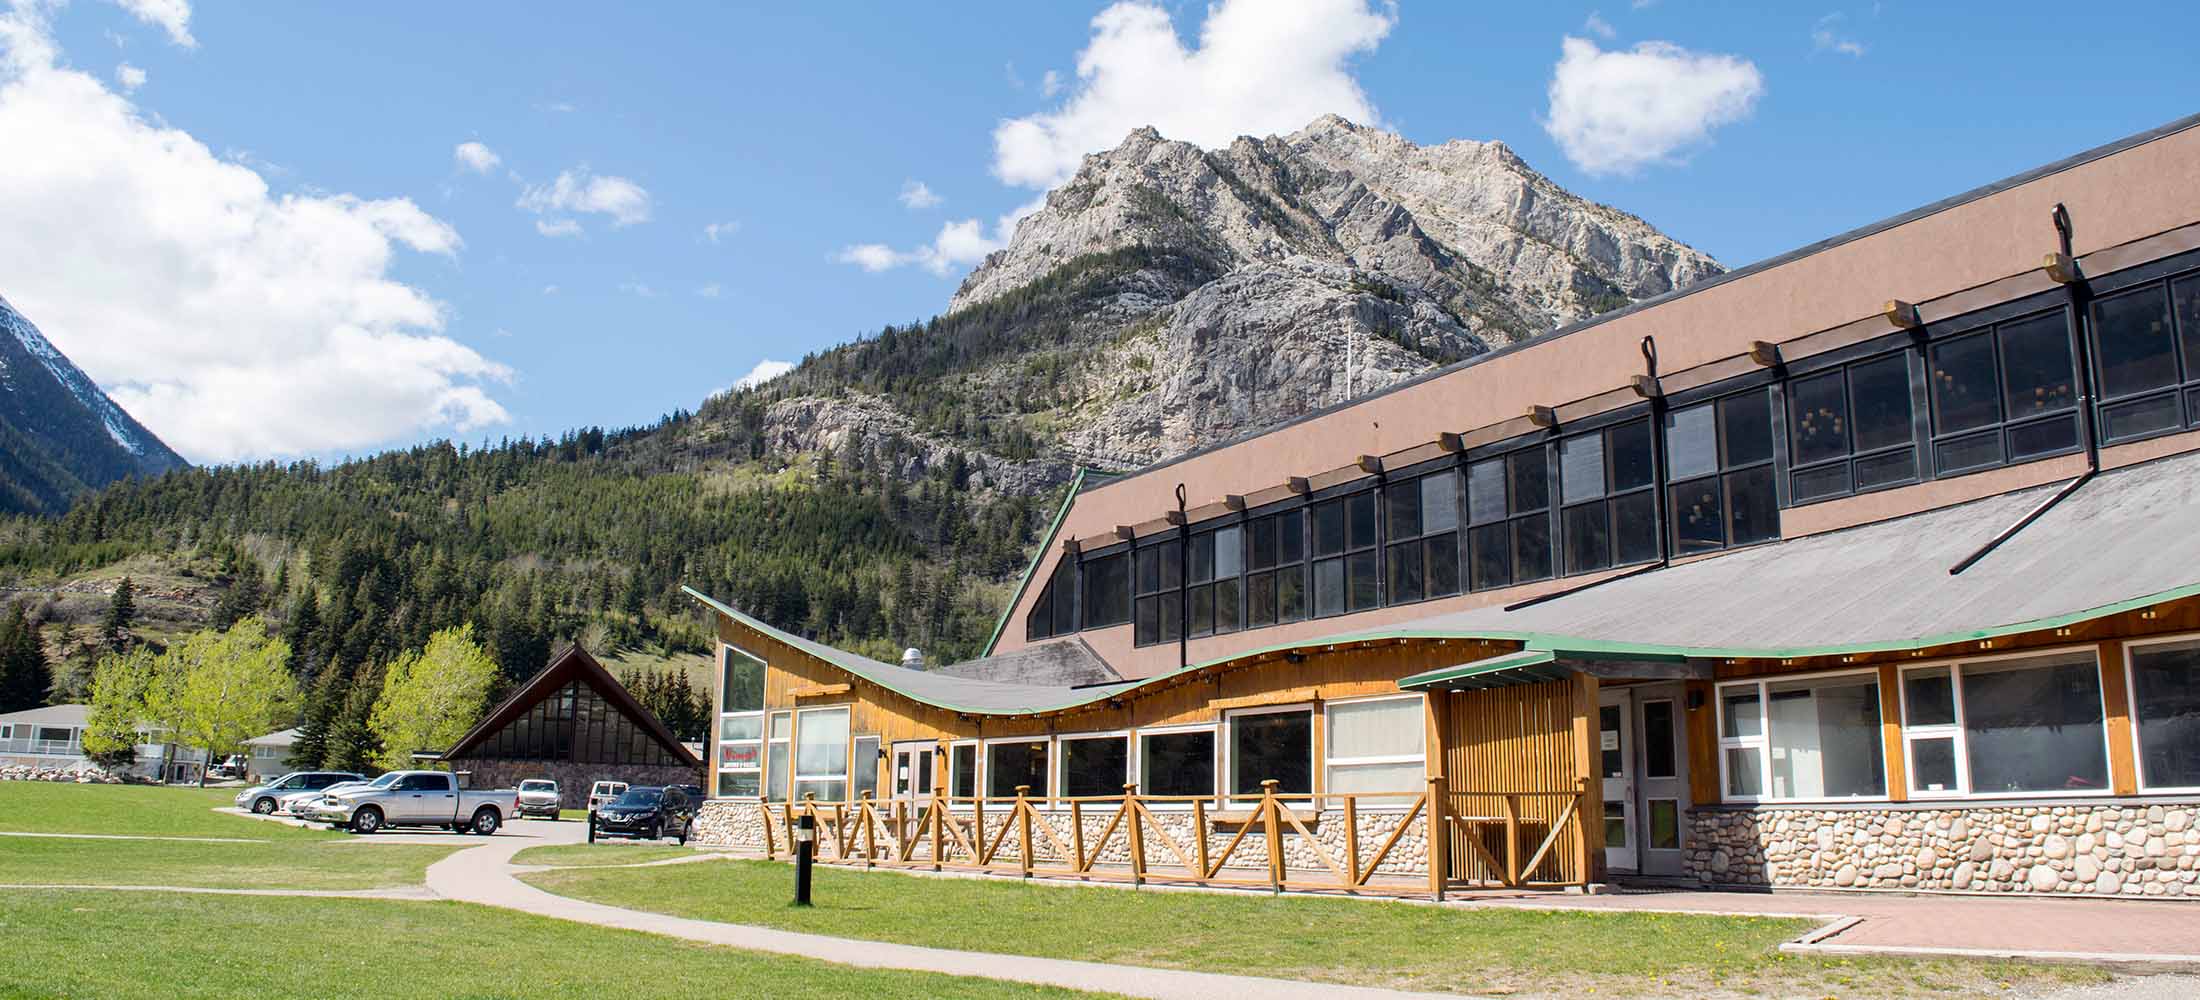 AN exterior photo of the Waterton Lakes Lodge & Vimy's Lounge and Grill with Bears Hump in the background.